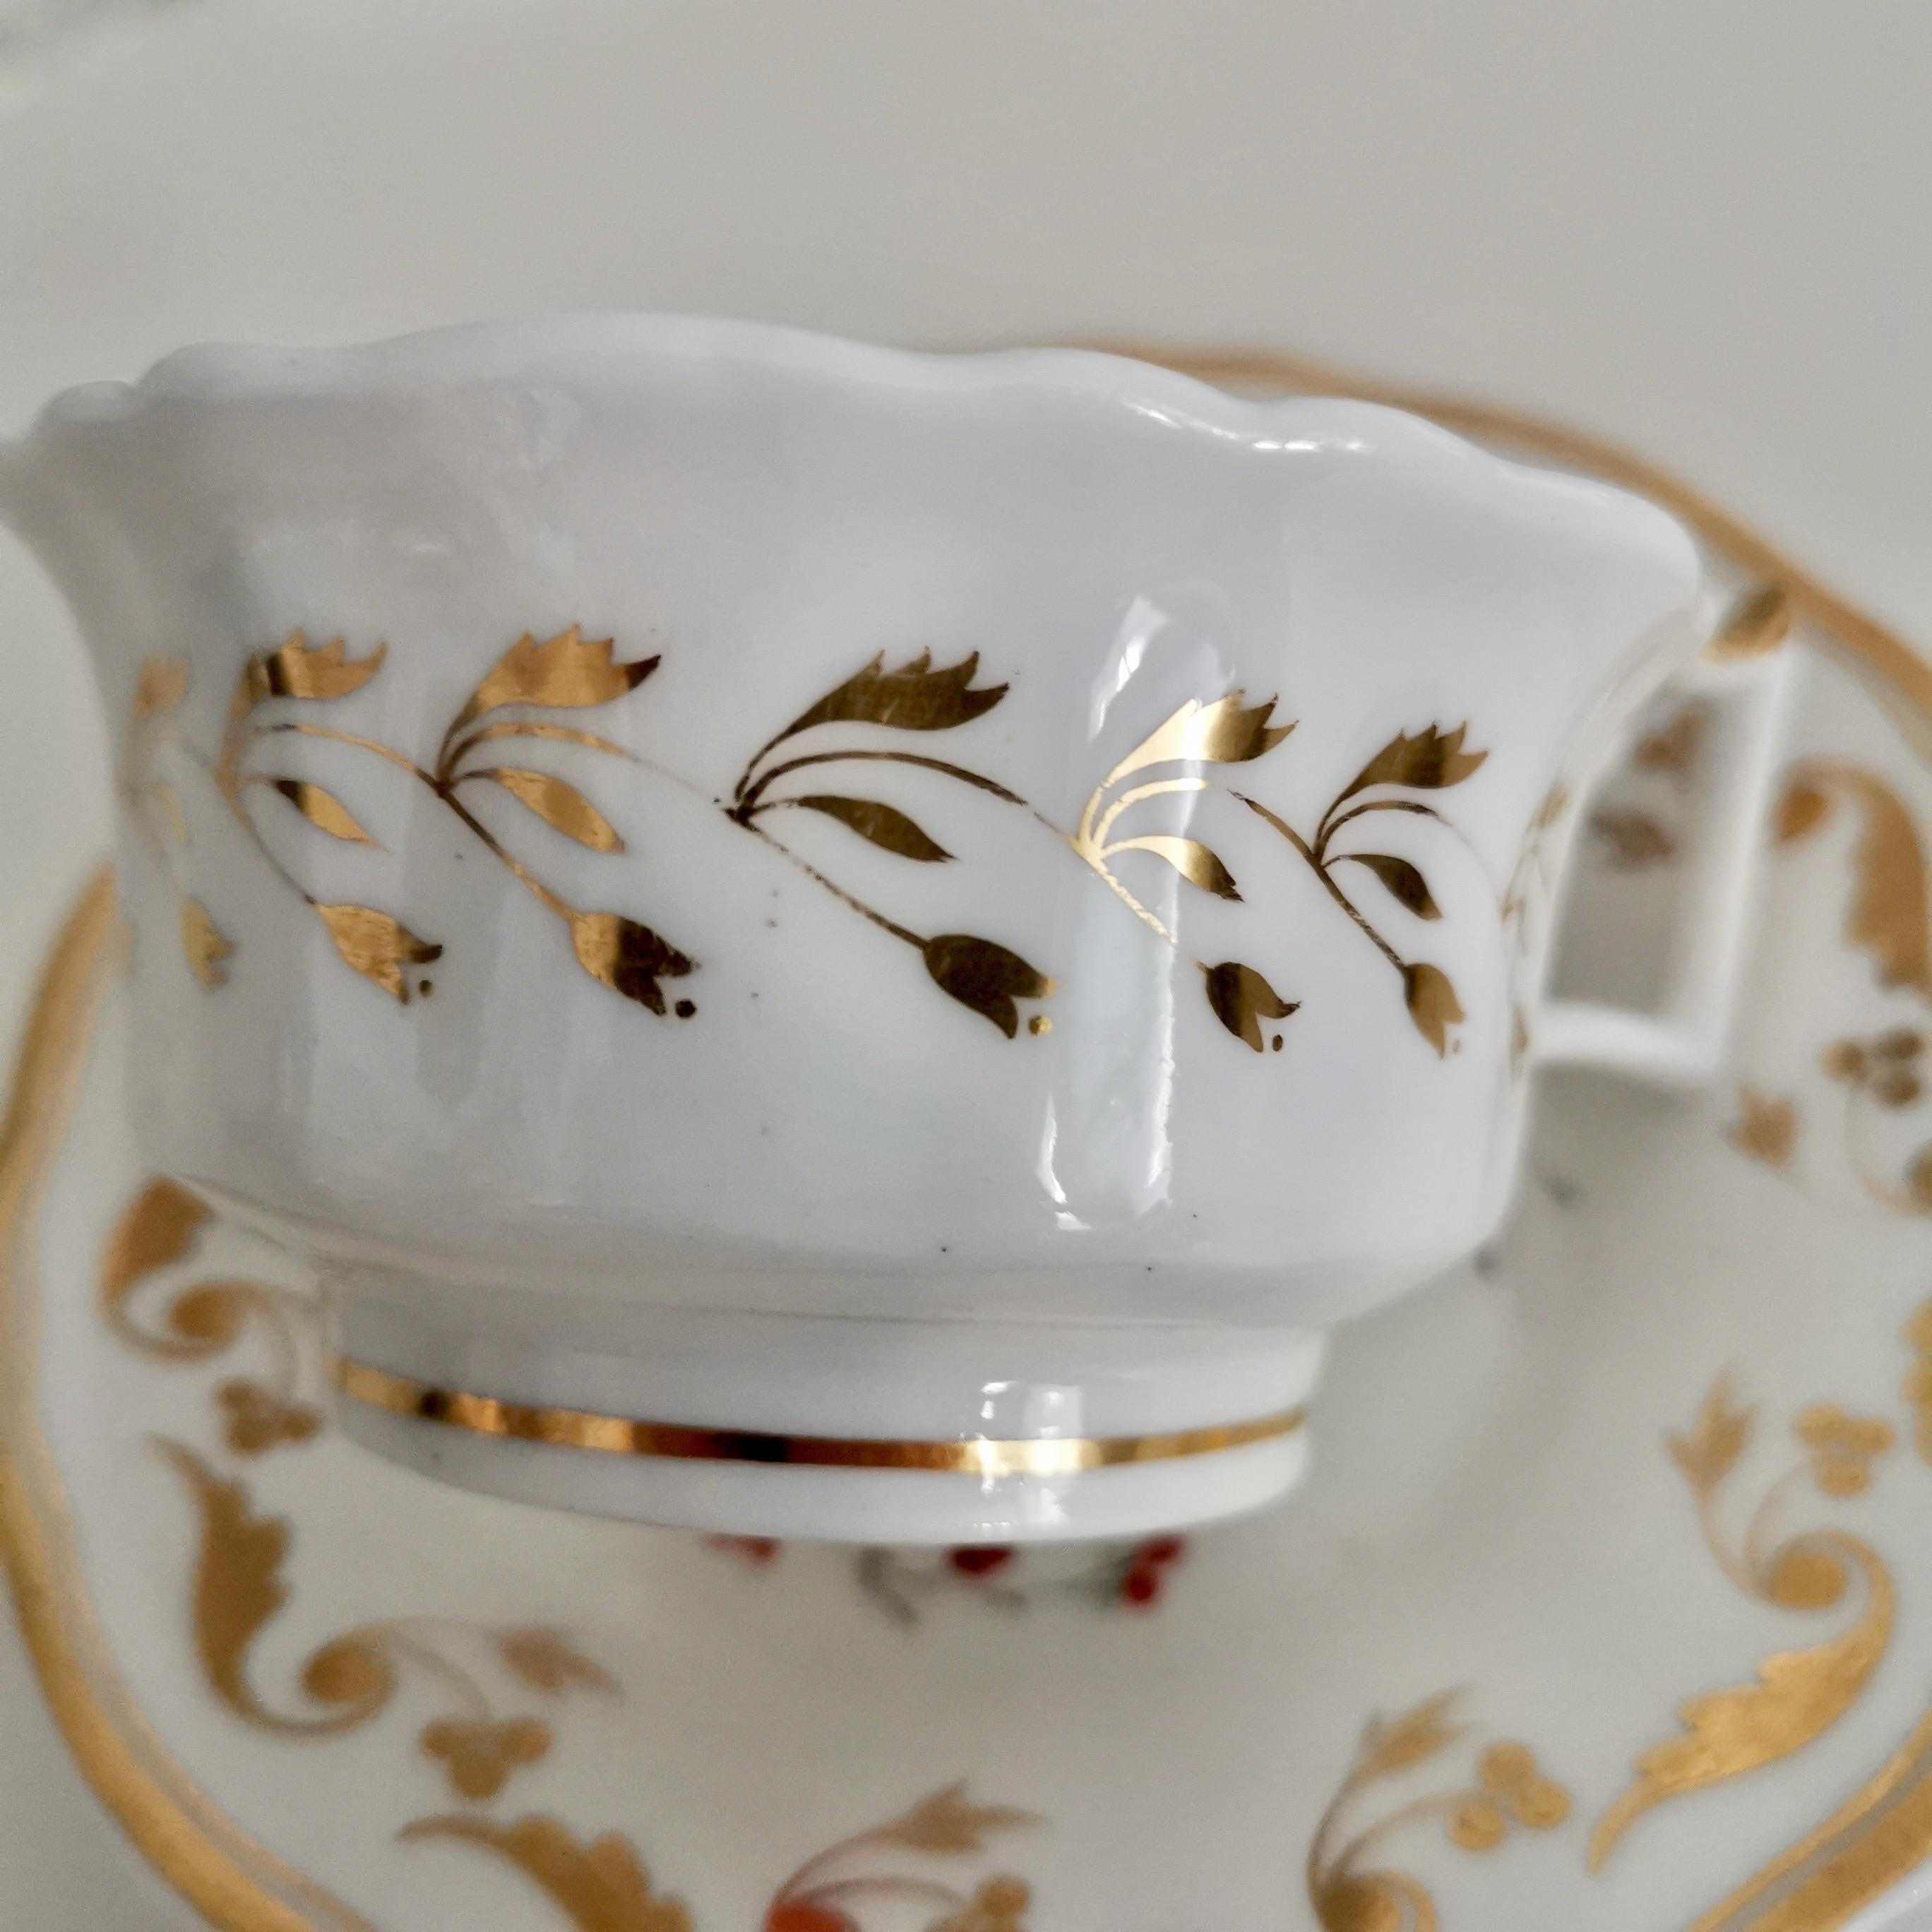 Yates Porcelain Teacup, White with Gilt and Flowers, Regency, circa 1825 8